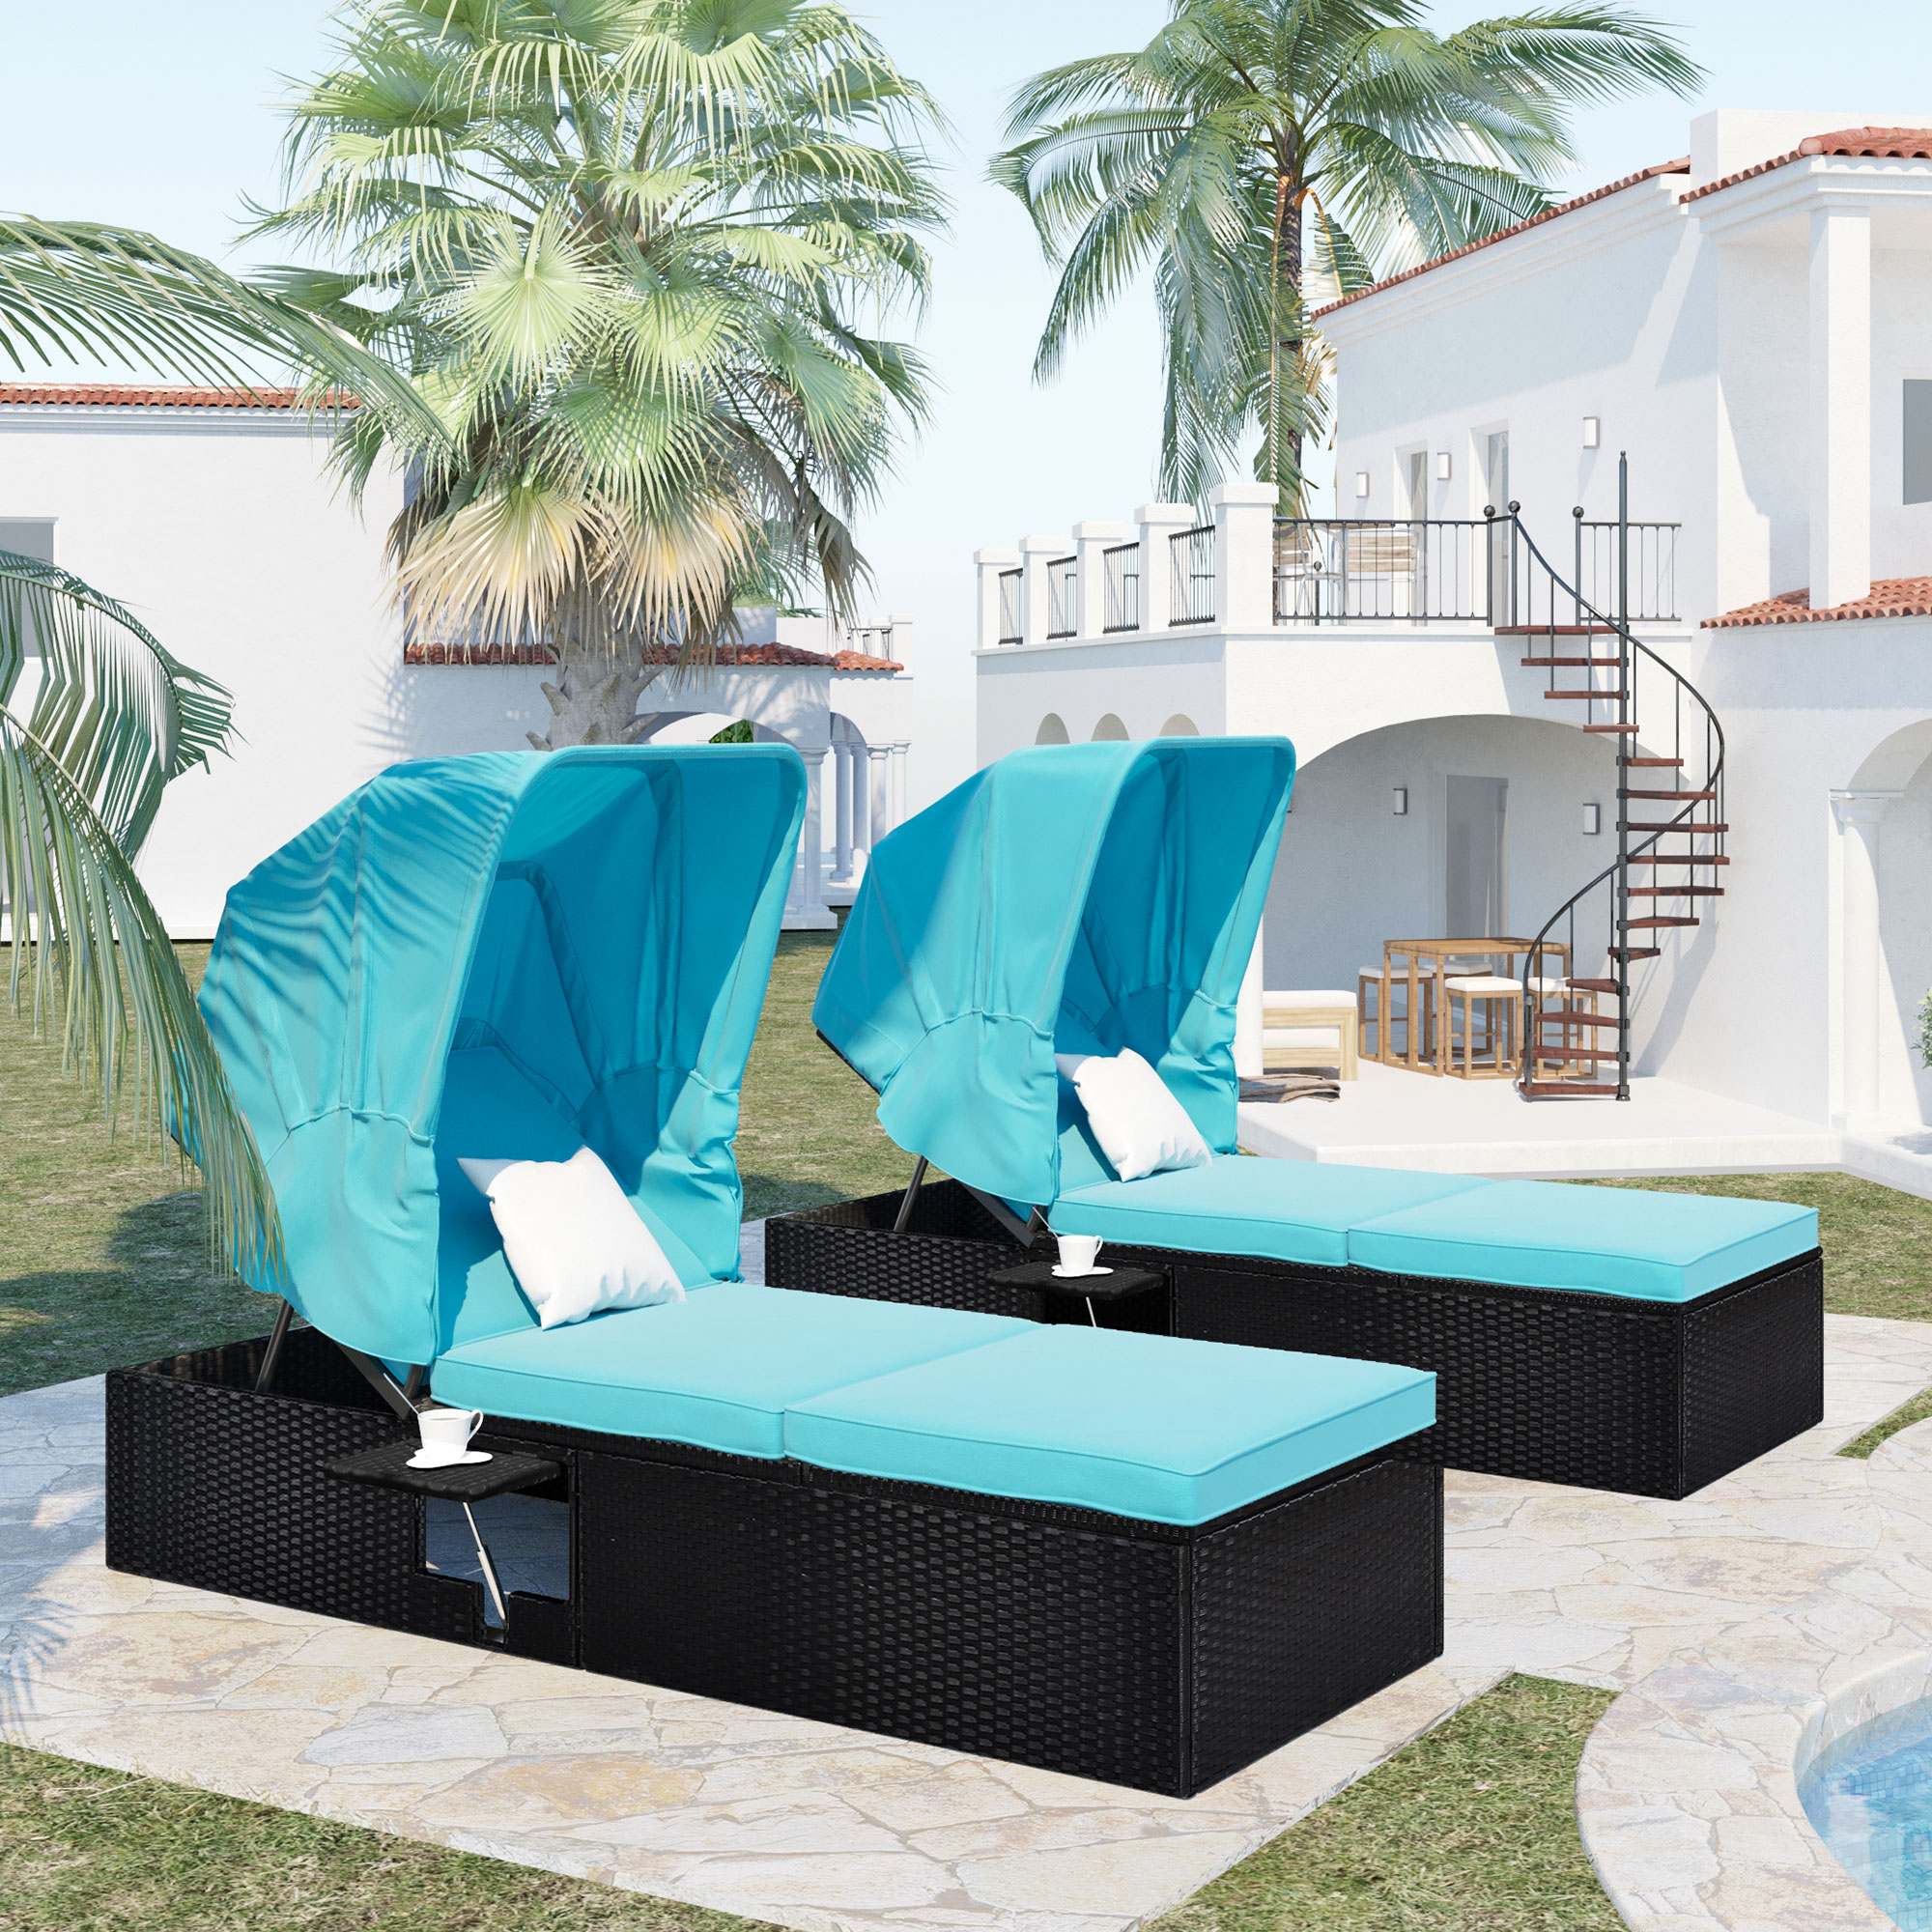 2 Pieces Patio Rattan Chaise Lounge Set with Canopy and Cup Table, Outdoor Cushioned Chaise with Adjustable Backrest, PE Wicker Lounge Furniture Set for Backyard, Poolside, Porch, Garden, Blue, D8755 - image 1 of 12